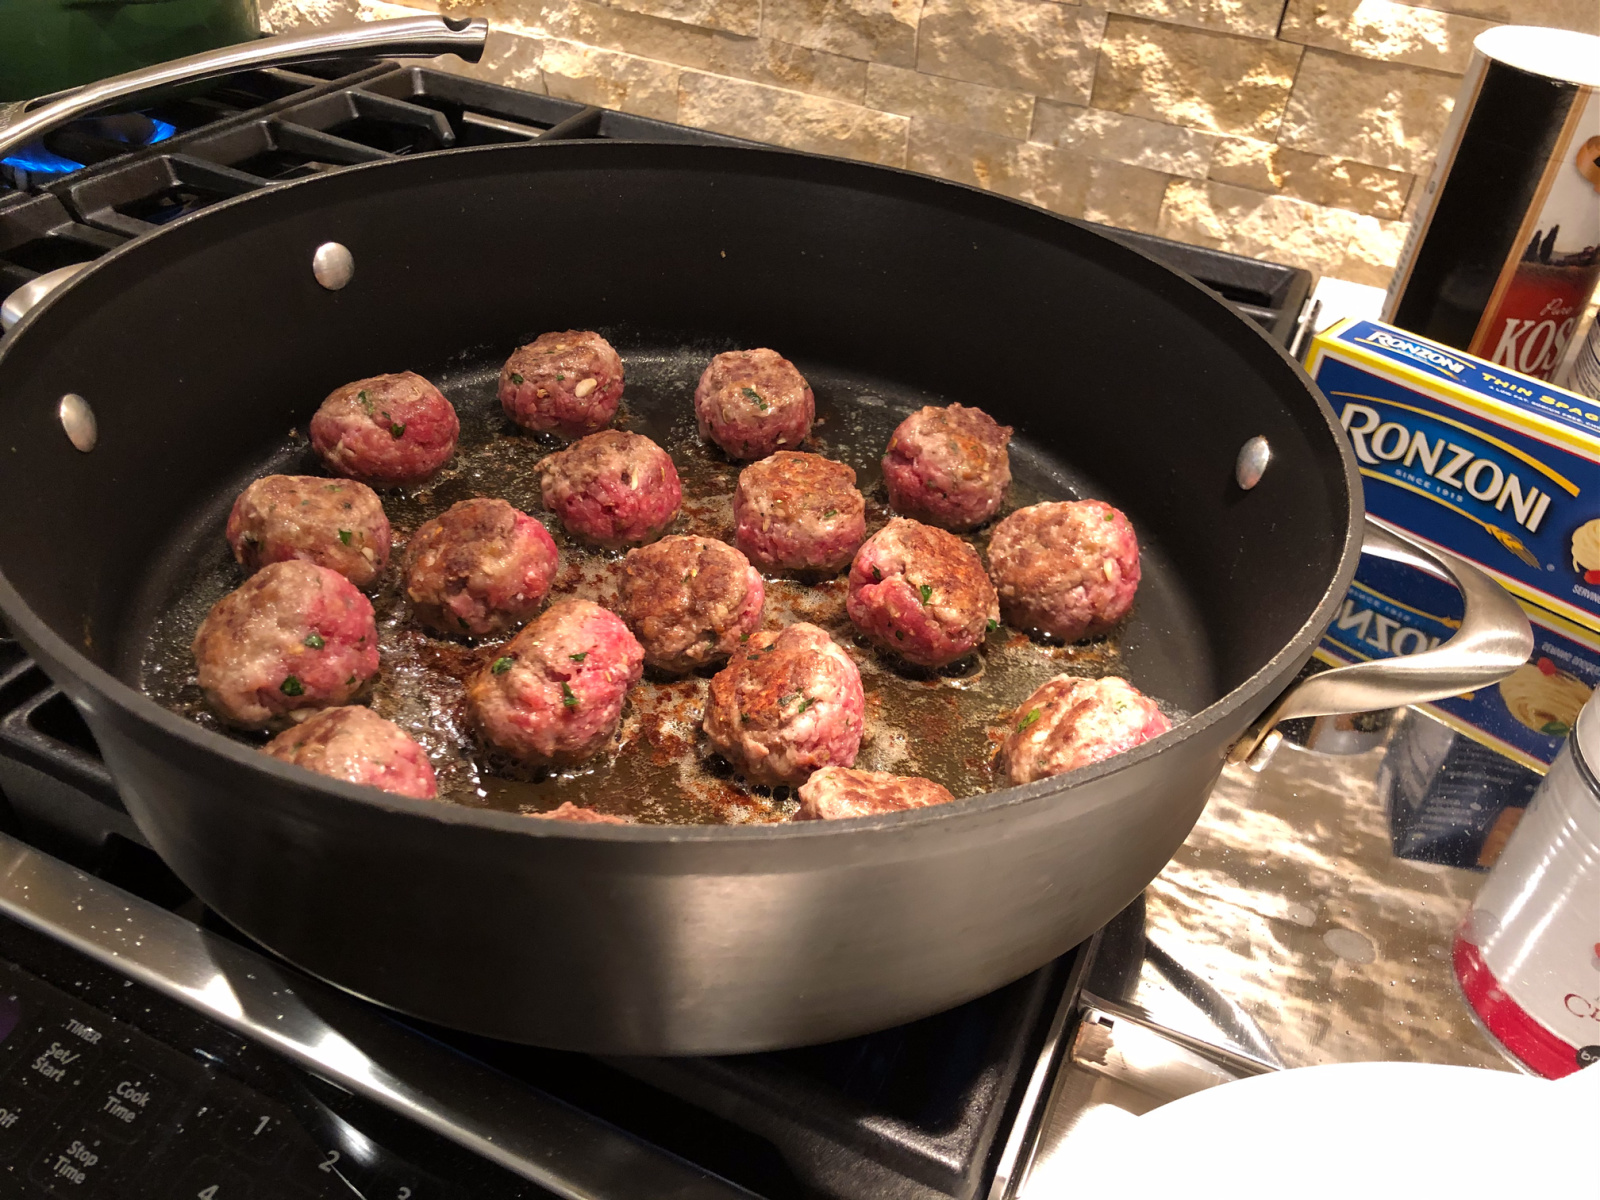 One-Pot Thin Spaghetti And Meatballs - Amazing Recipe To Go With The Ronzoni BOGO Sale! on I Heart Publix 4